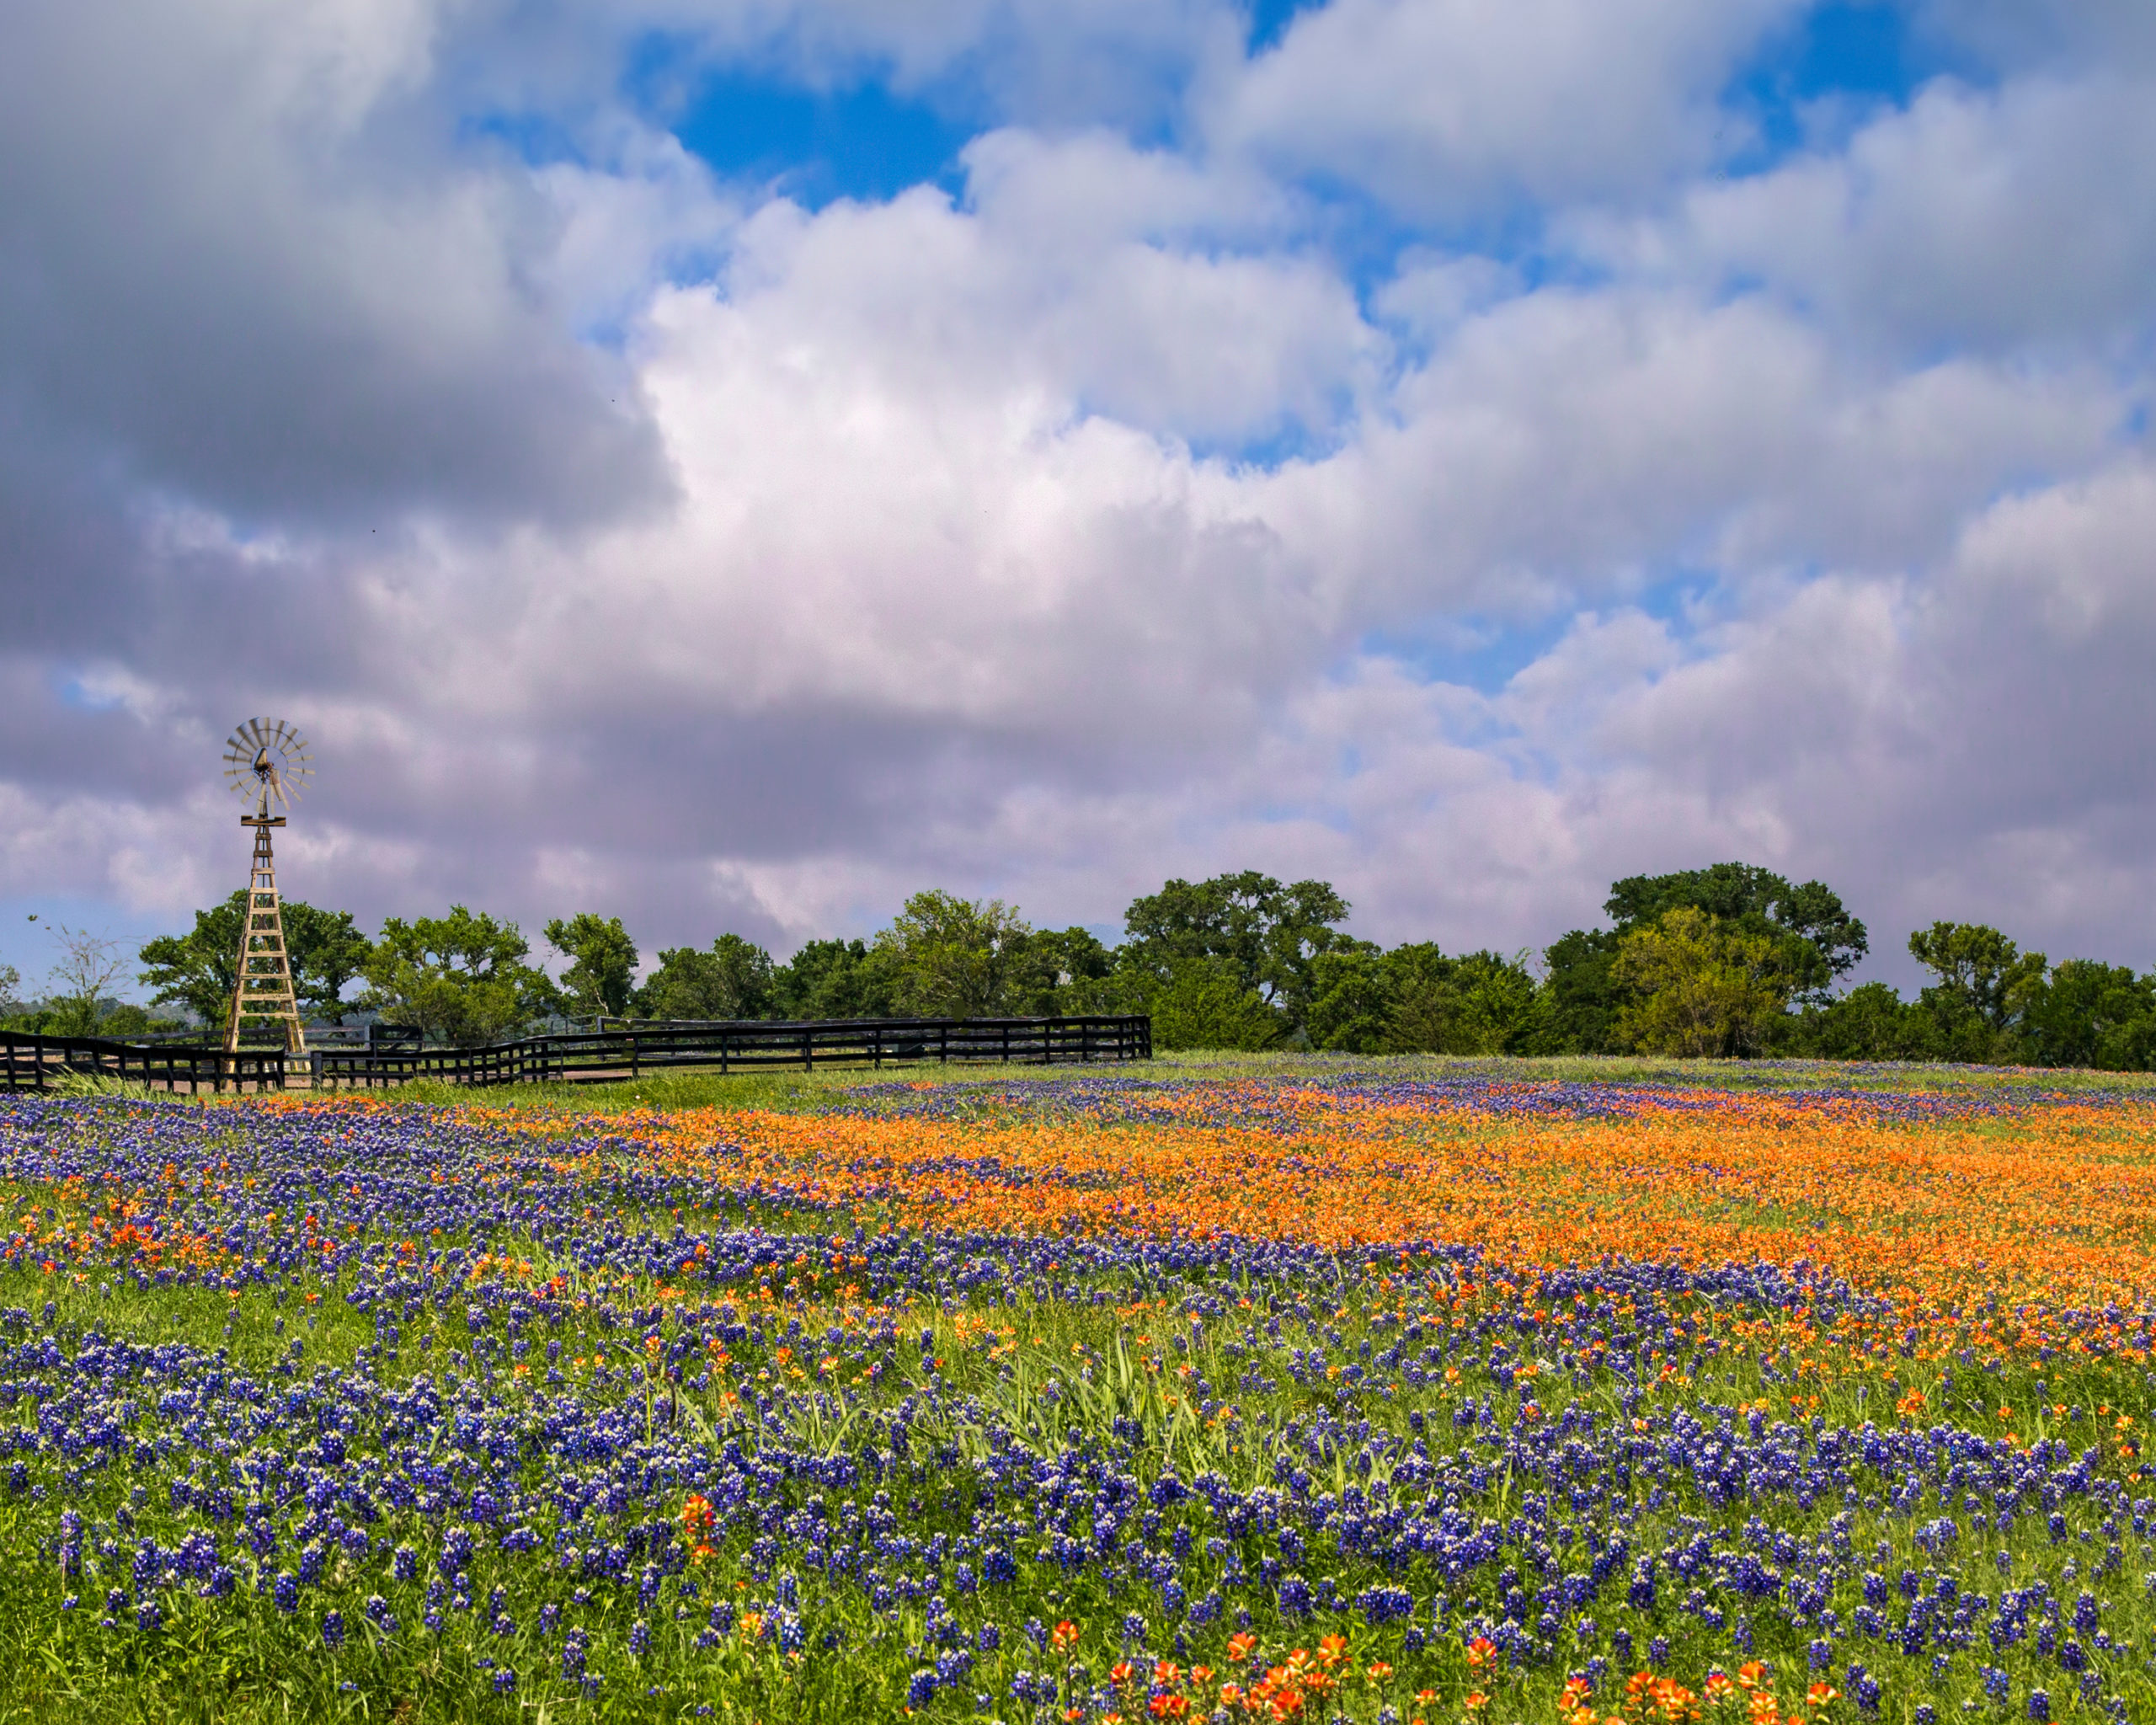 A field full of blue and orange flowers under a cloudy sky